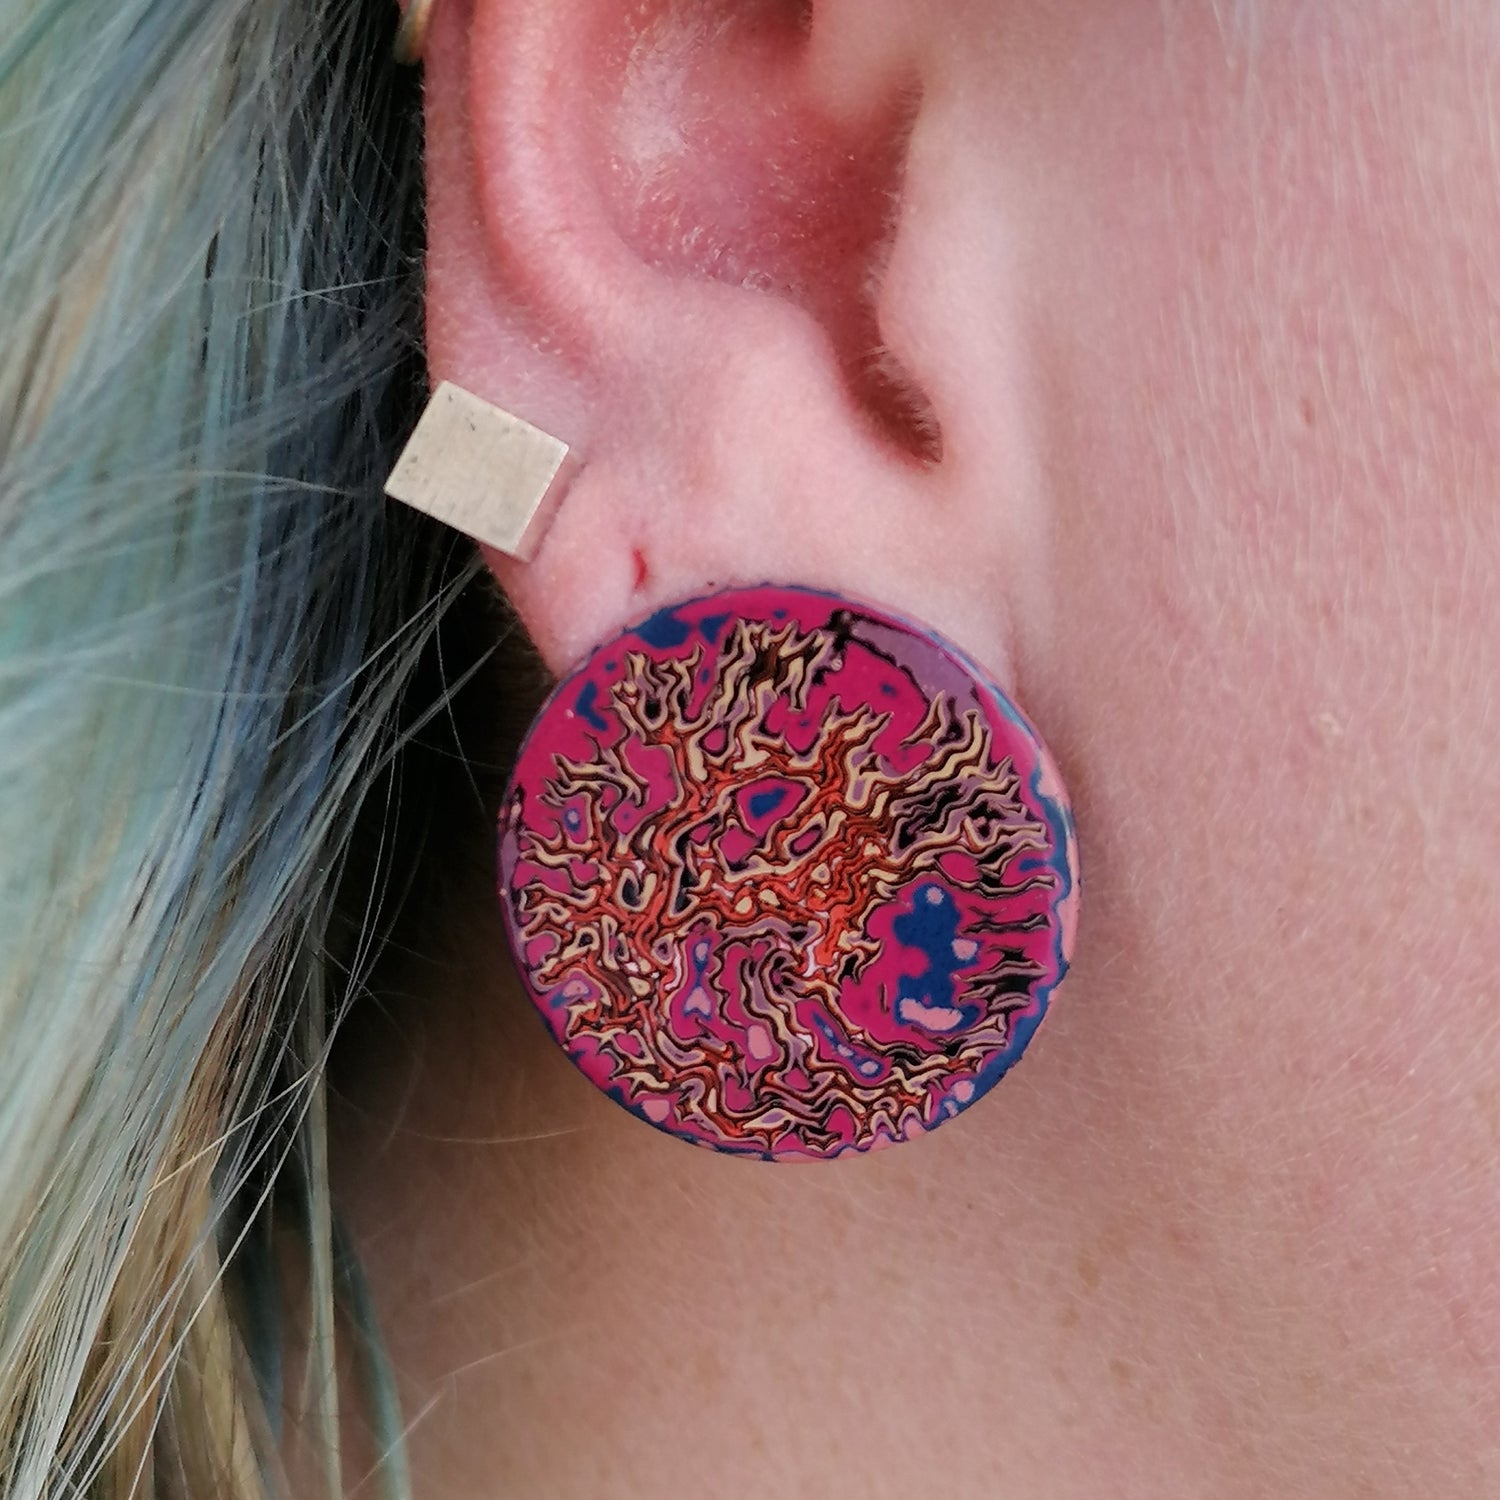 Image is focused in on the ear and  shows  a single earring, wrinkled pattern in orange yellow pink and blue